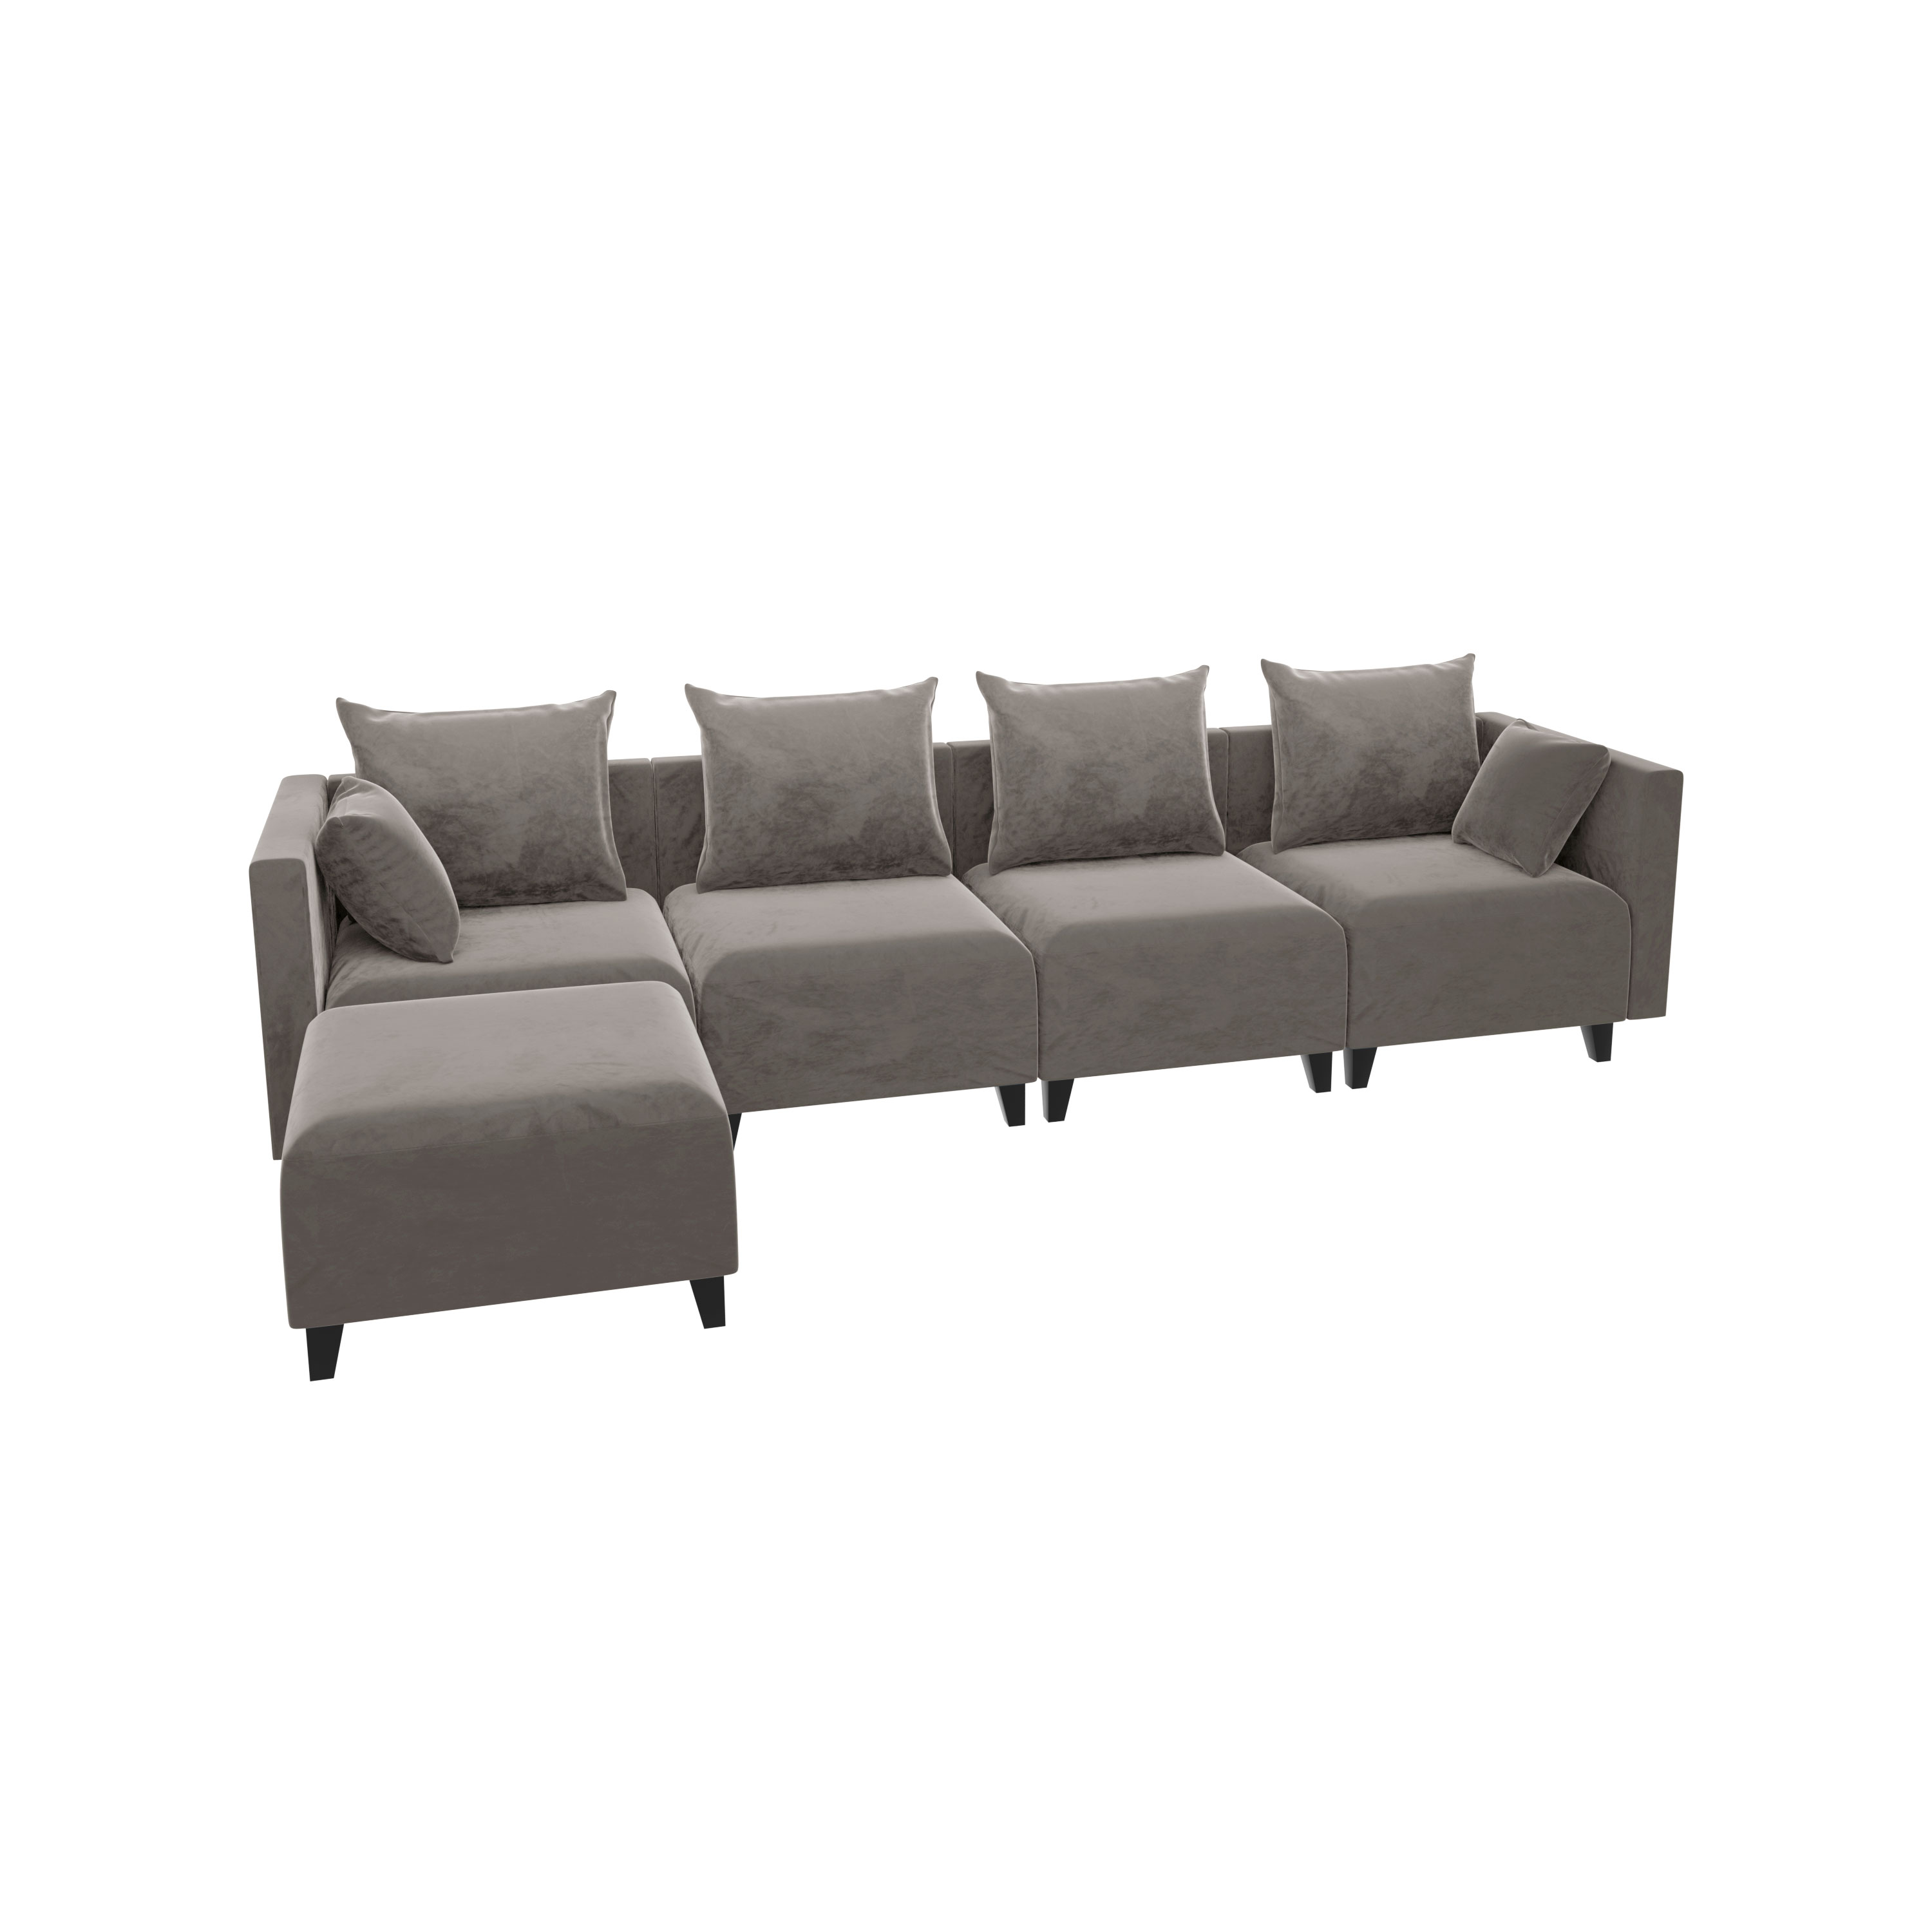 Sectional Sofa modular Couch L Shape with 6 Pillows for Living Room Camel